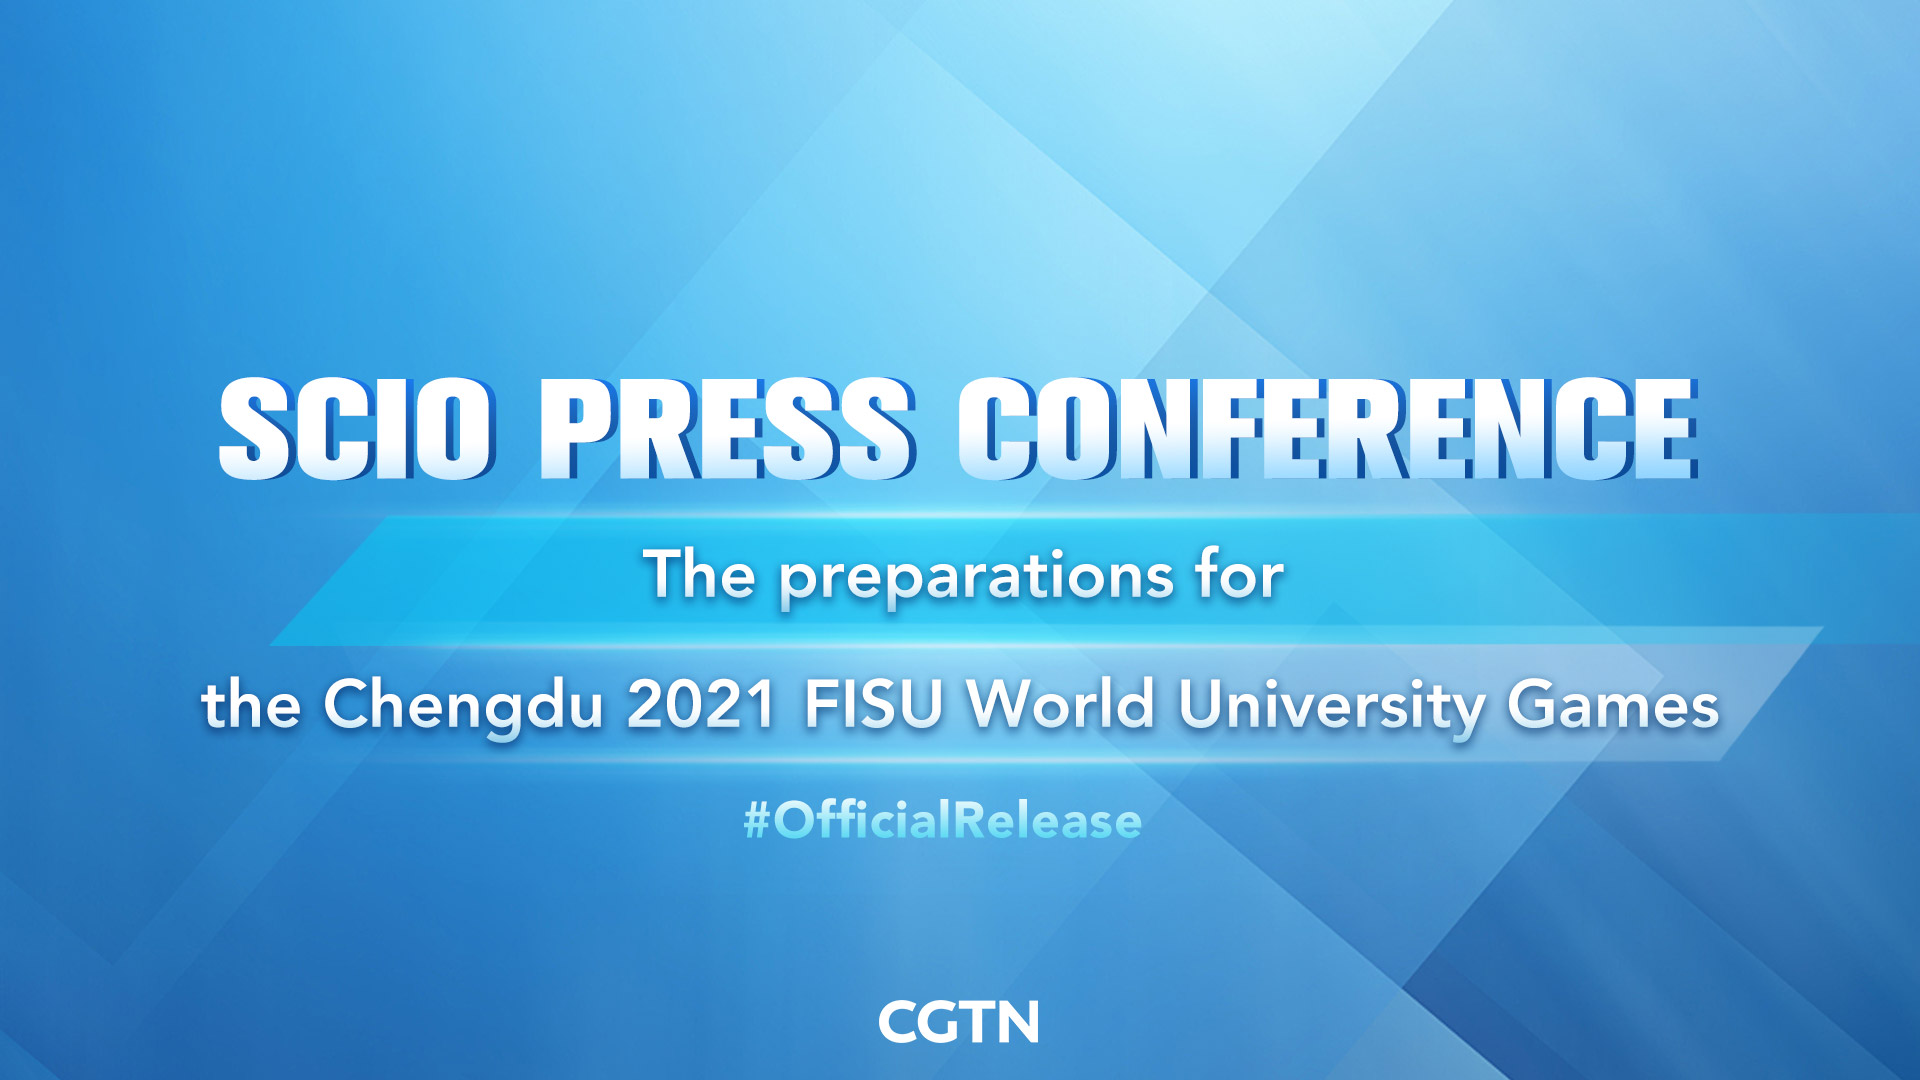 Live: Press conference on the preparations for the Chengdu 2021 FISU World University Games